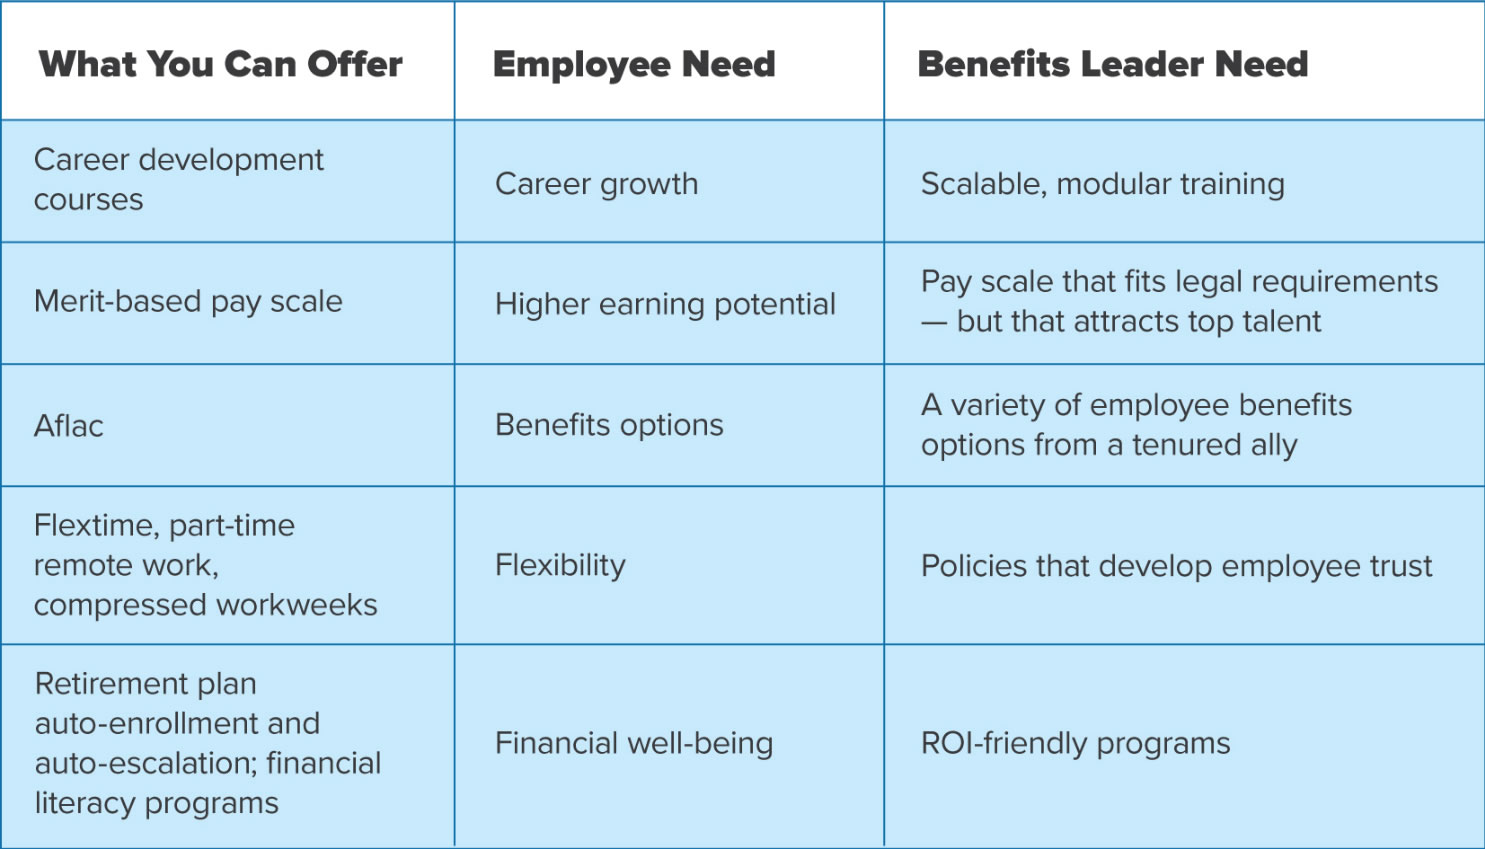 What public sector can offer, what the employees need and what the benefits leader needs.